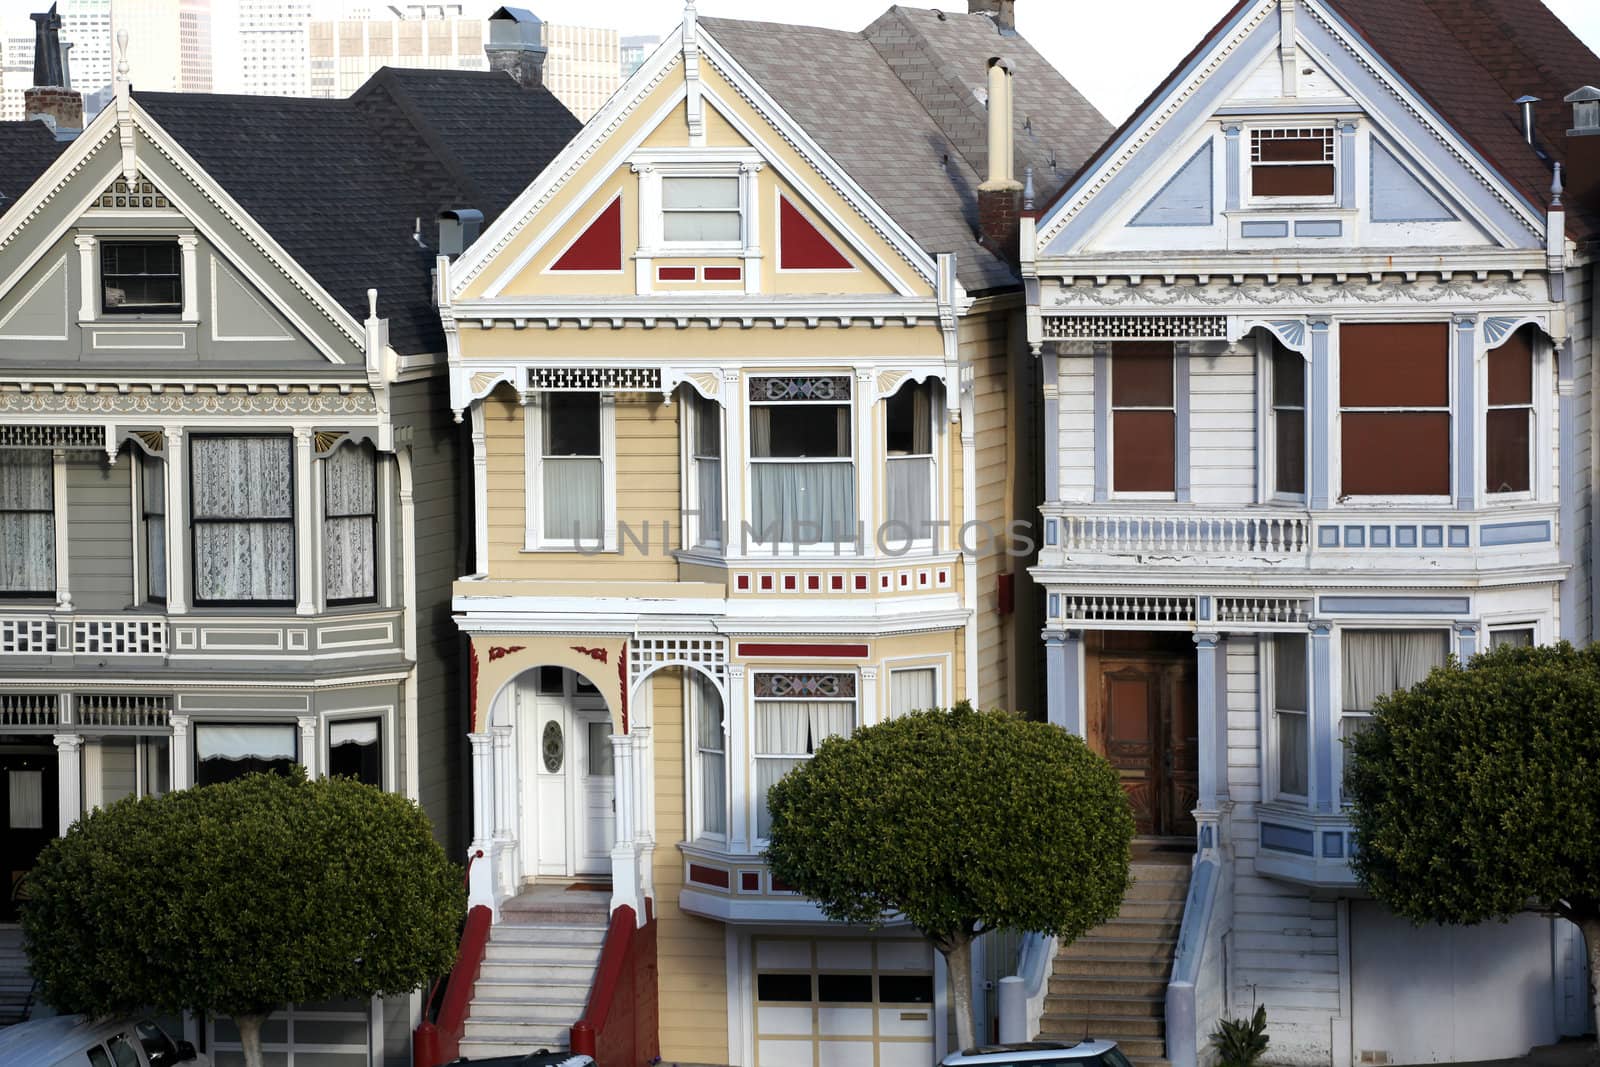 Painted ladies houses by oscarcwilliams